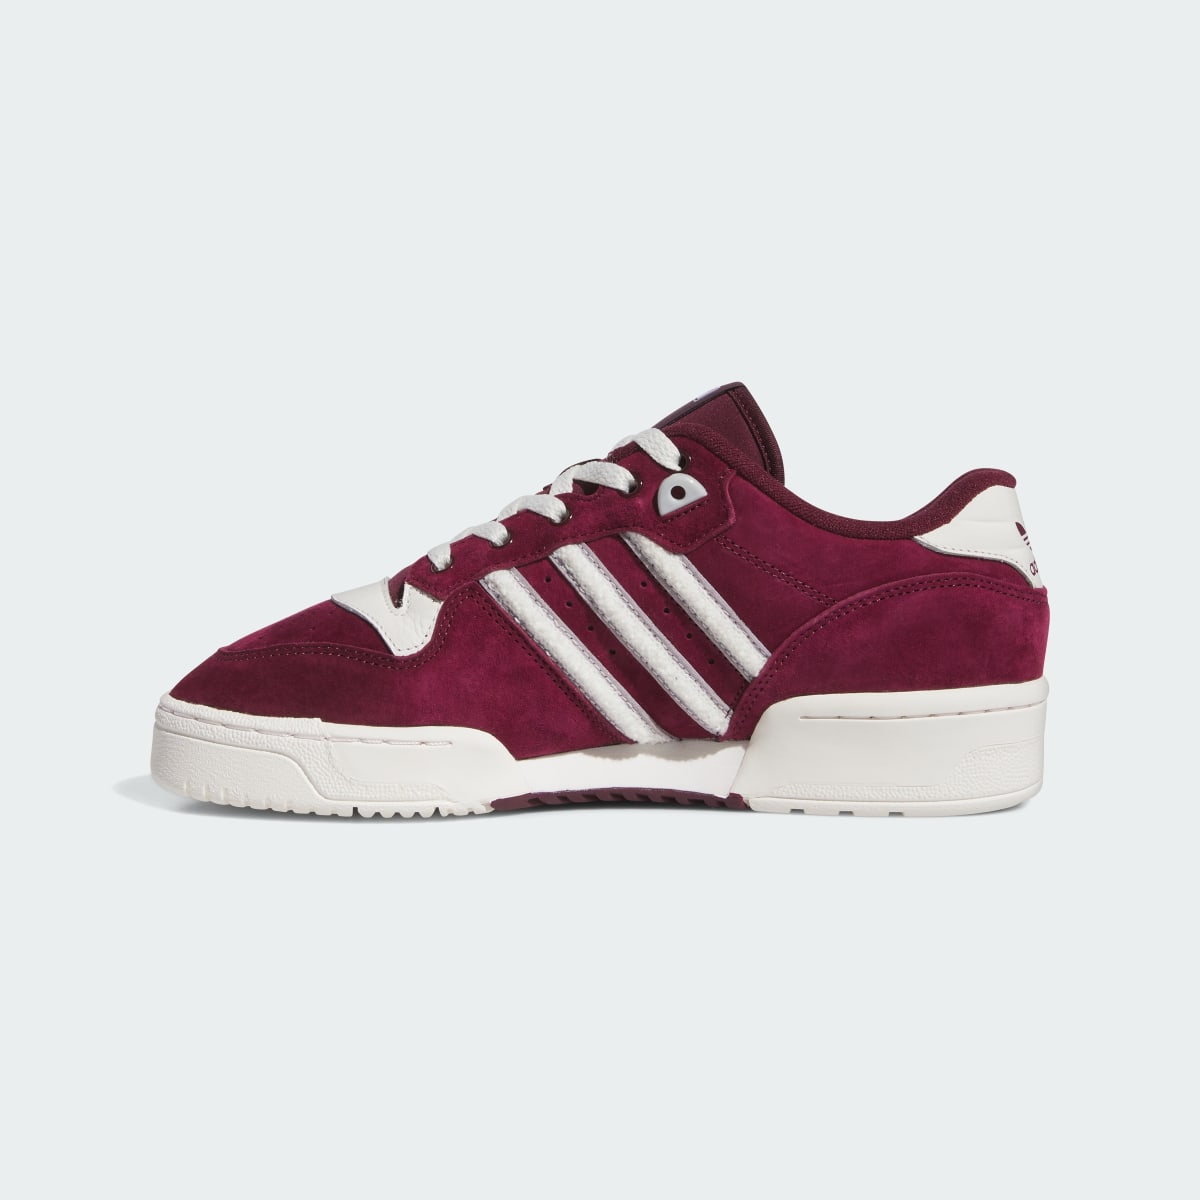 Adidas Texas A&M Rivalry Low Shoes. 7